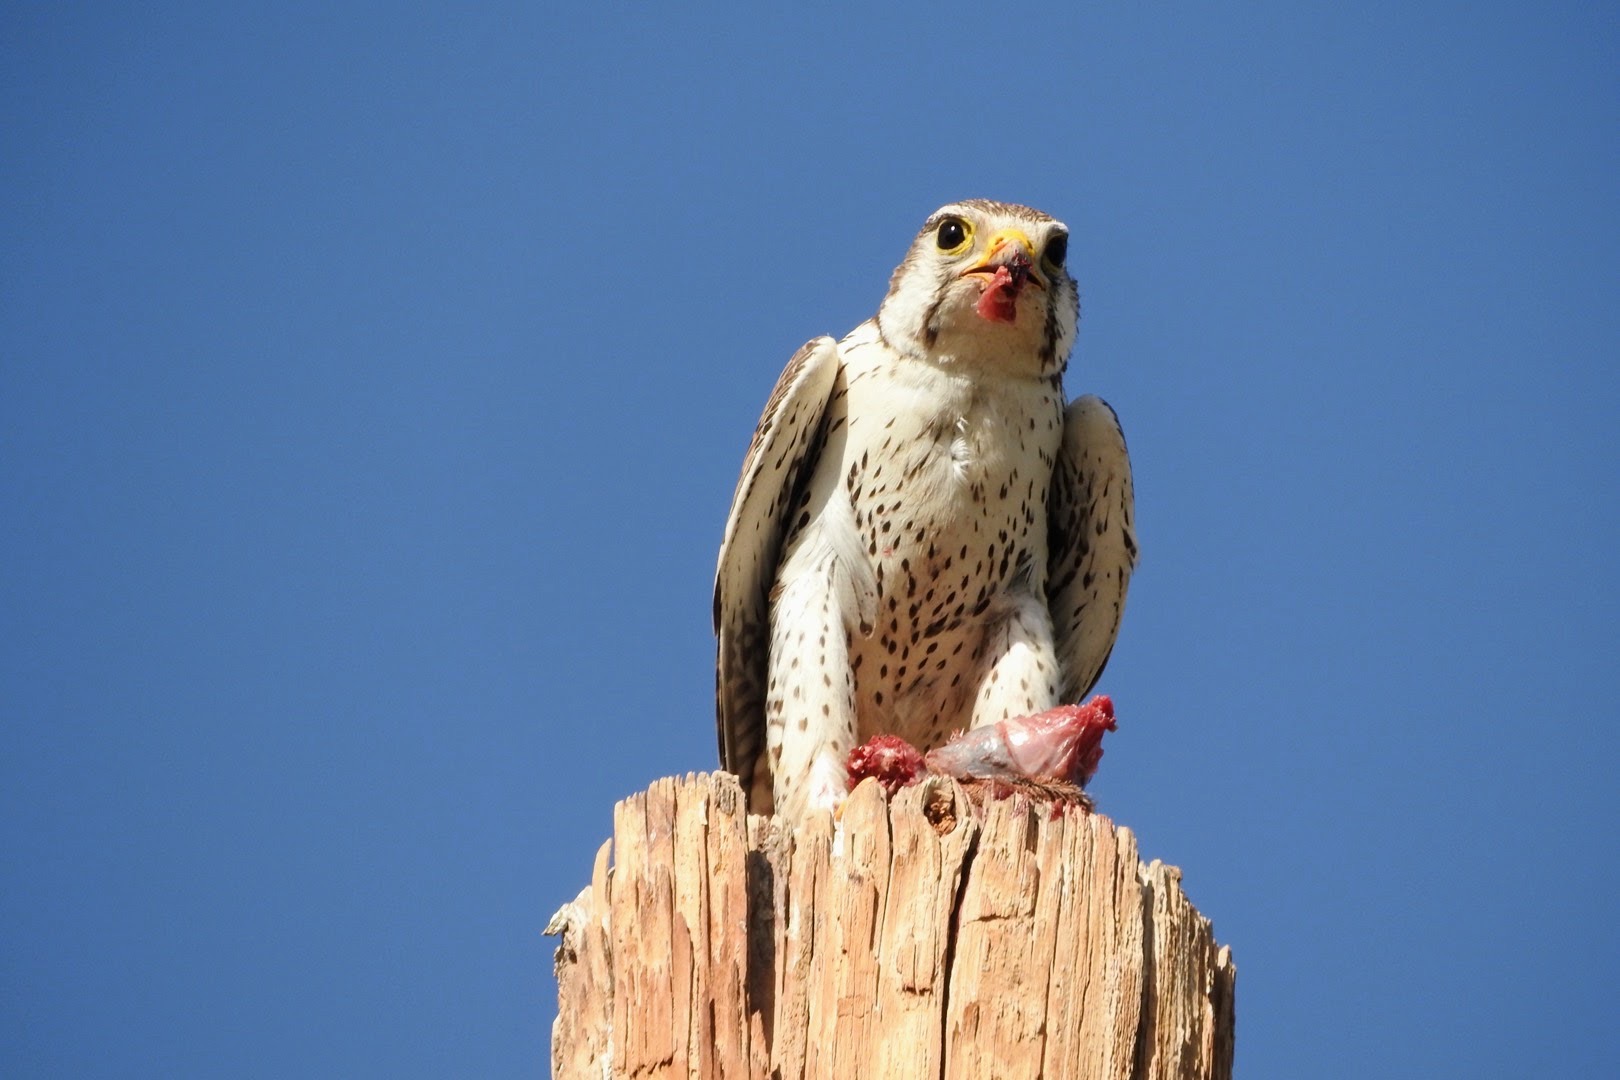 Photo by Banook rodarte   |  I saw this prairie falcon eating a round-tailed ground squirrel on top of a pole .I zoomed in with my camera 